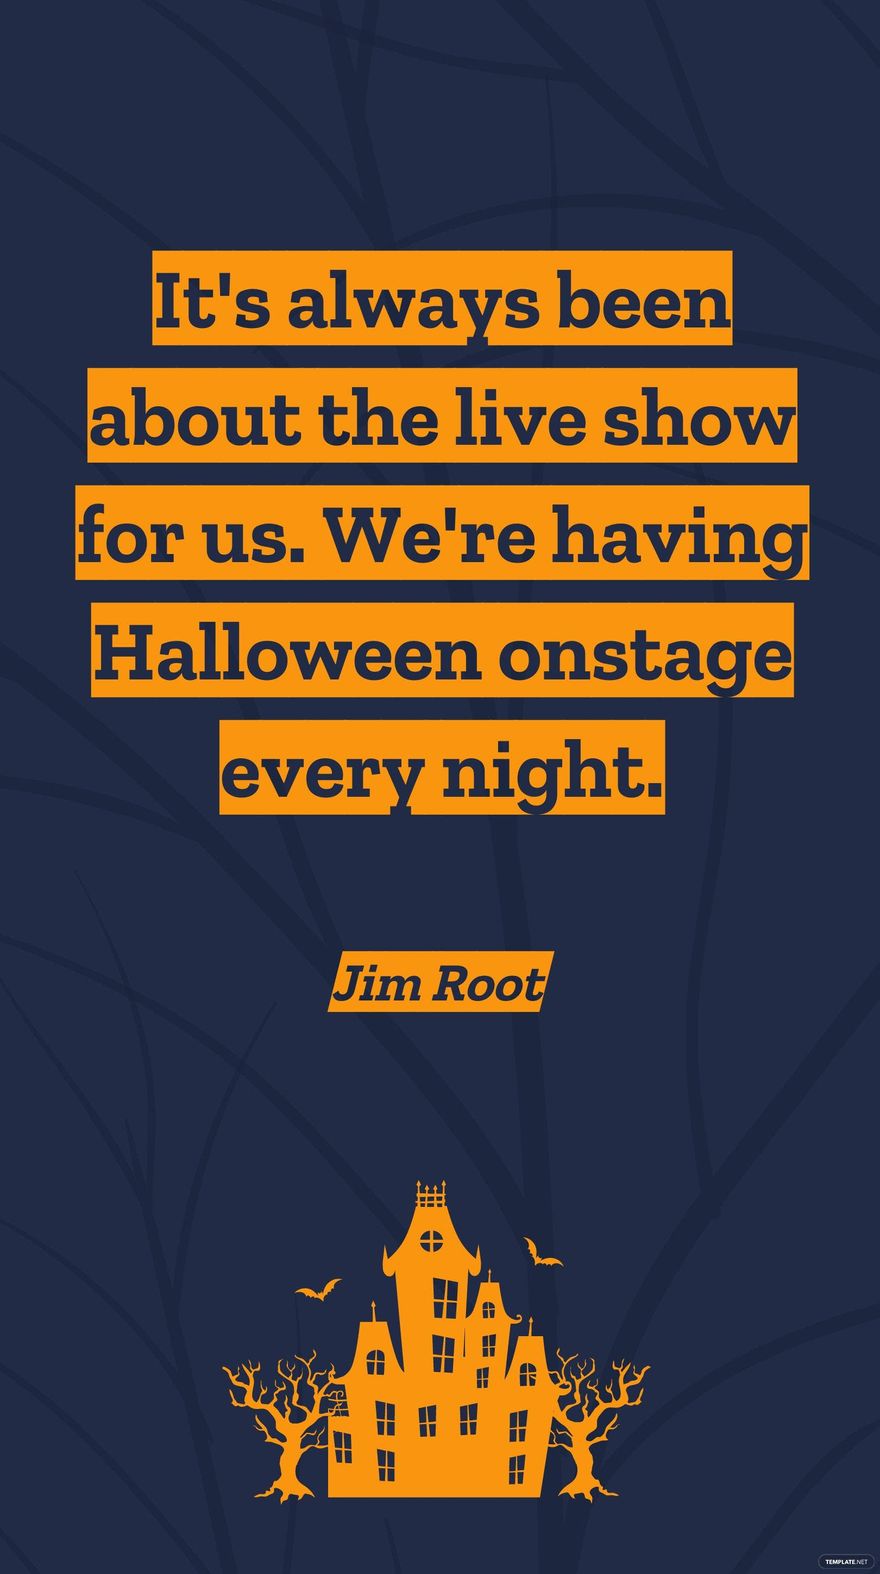 Jim Root - It's always been about the live show for us. We're having Halloween onstage every night. in JPG